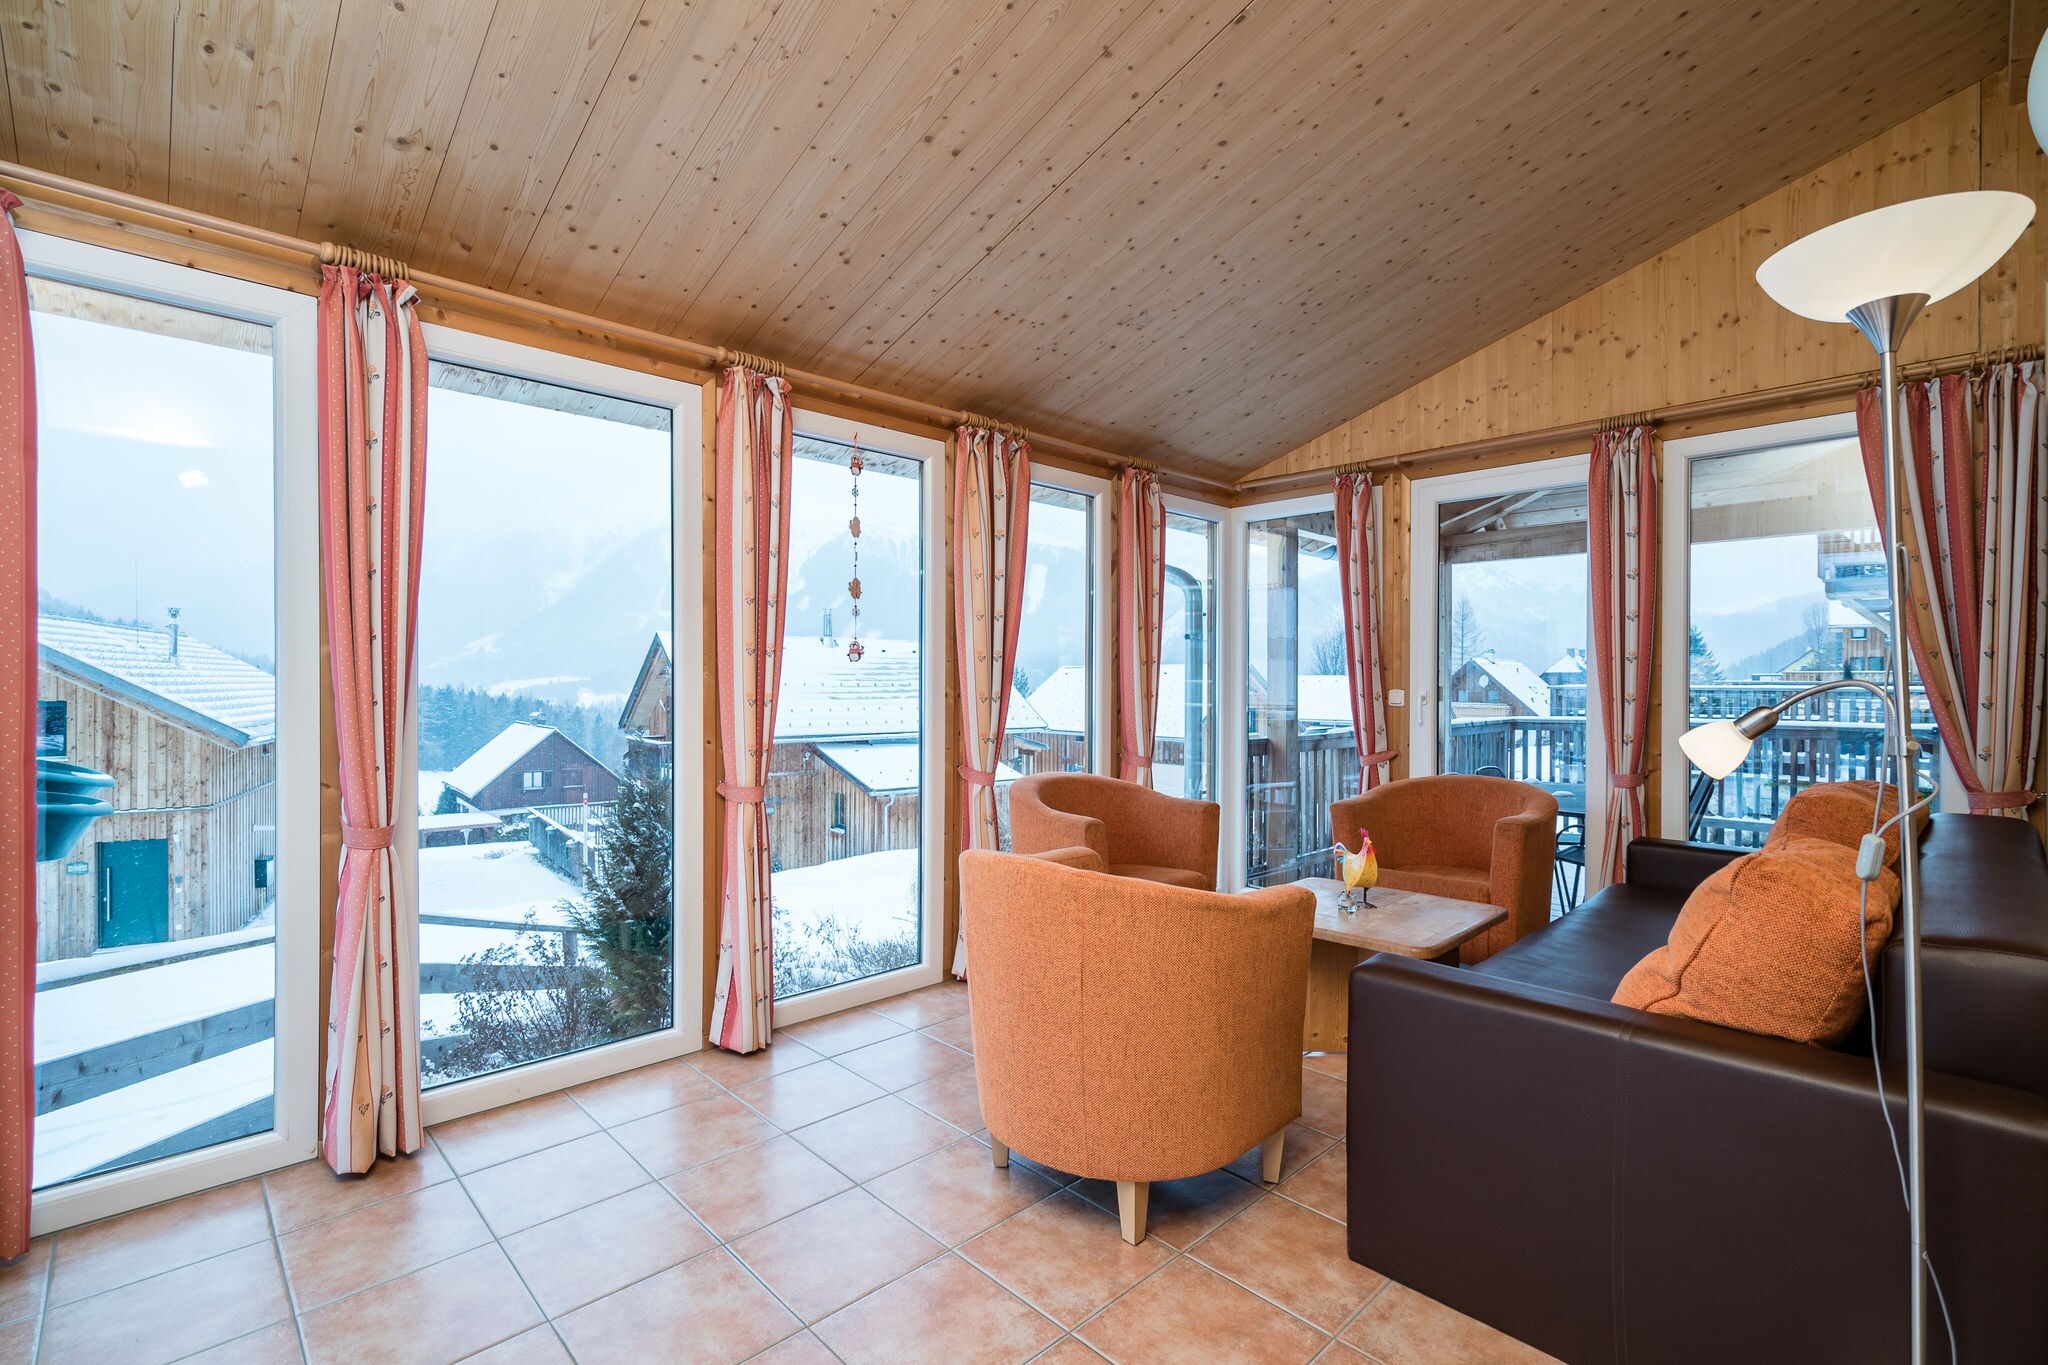 Luxury Chalet in Hohentauern with Panoramic Mountain Views